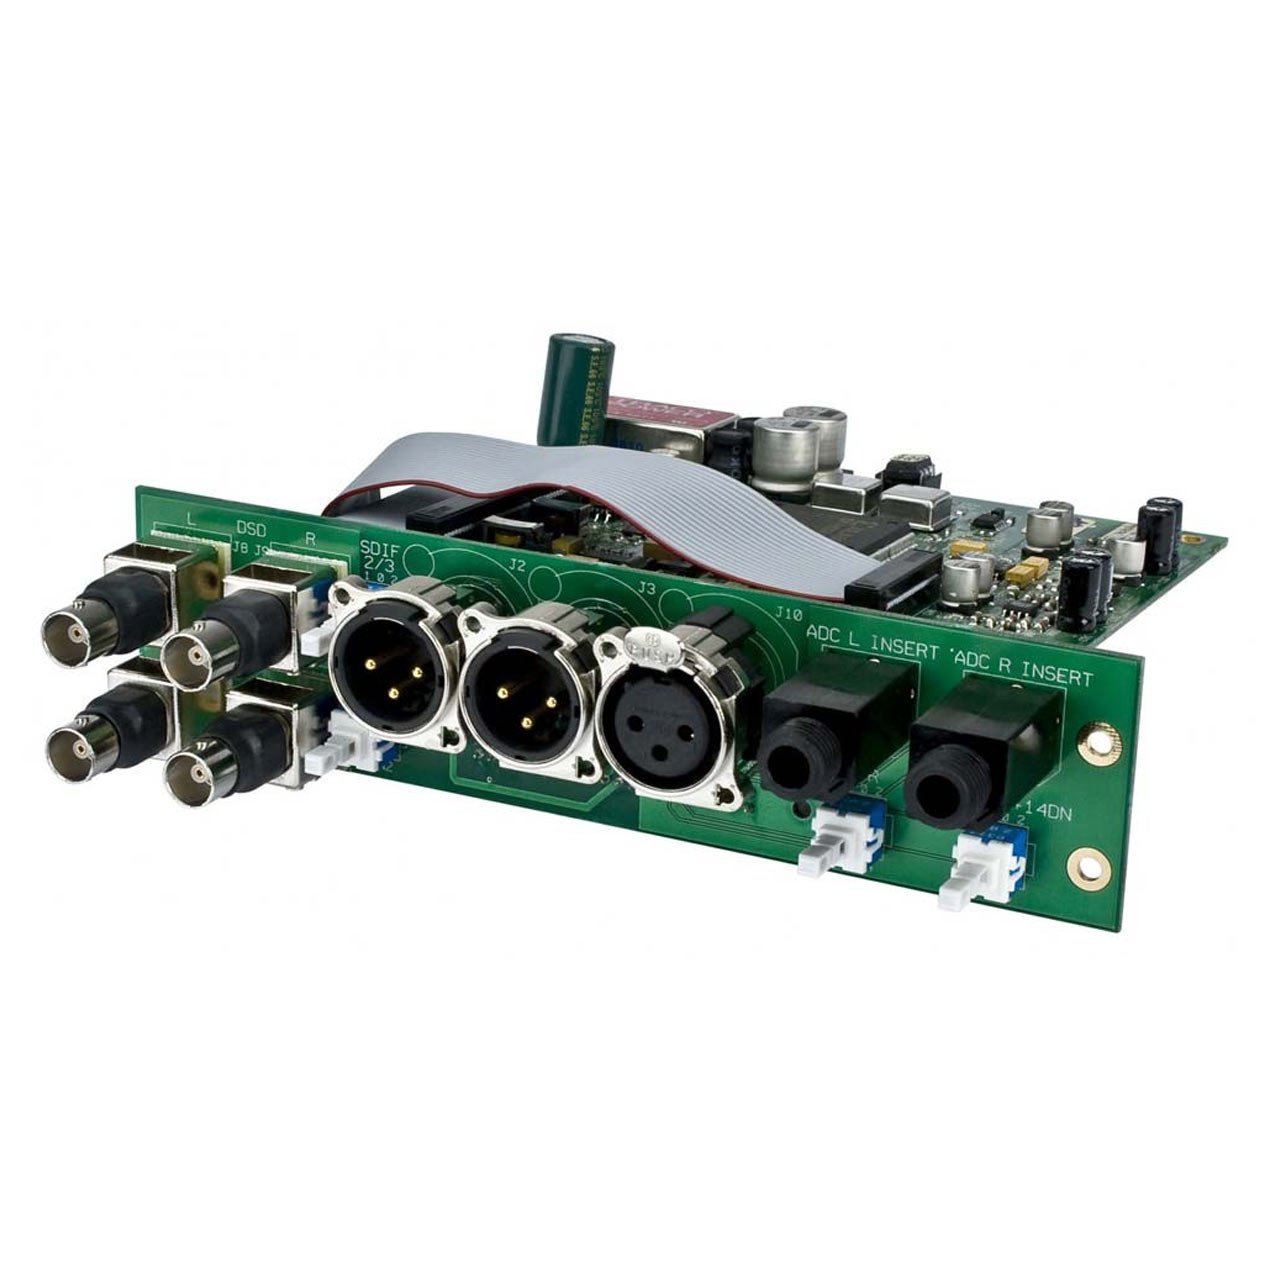 Outboard Accessories - Neve AMS 8816 ADC Expansion Card